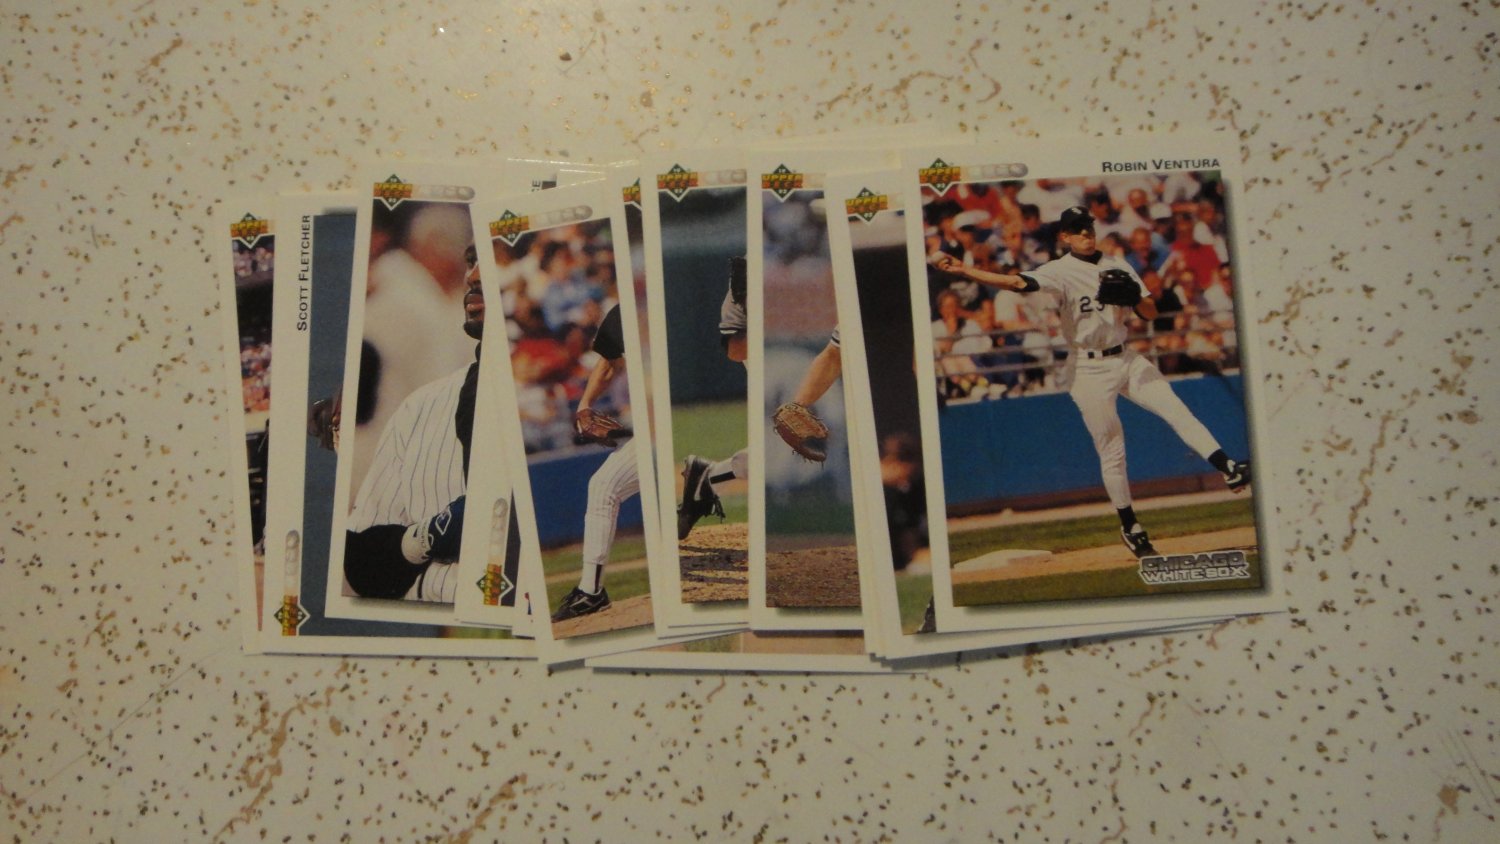 1992 Upper Deck baseball Cards, 23 in all no repeats..All Chicago White Sox Players